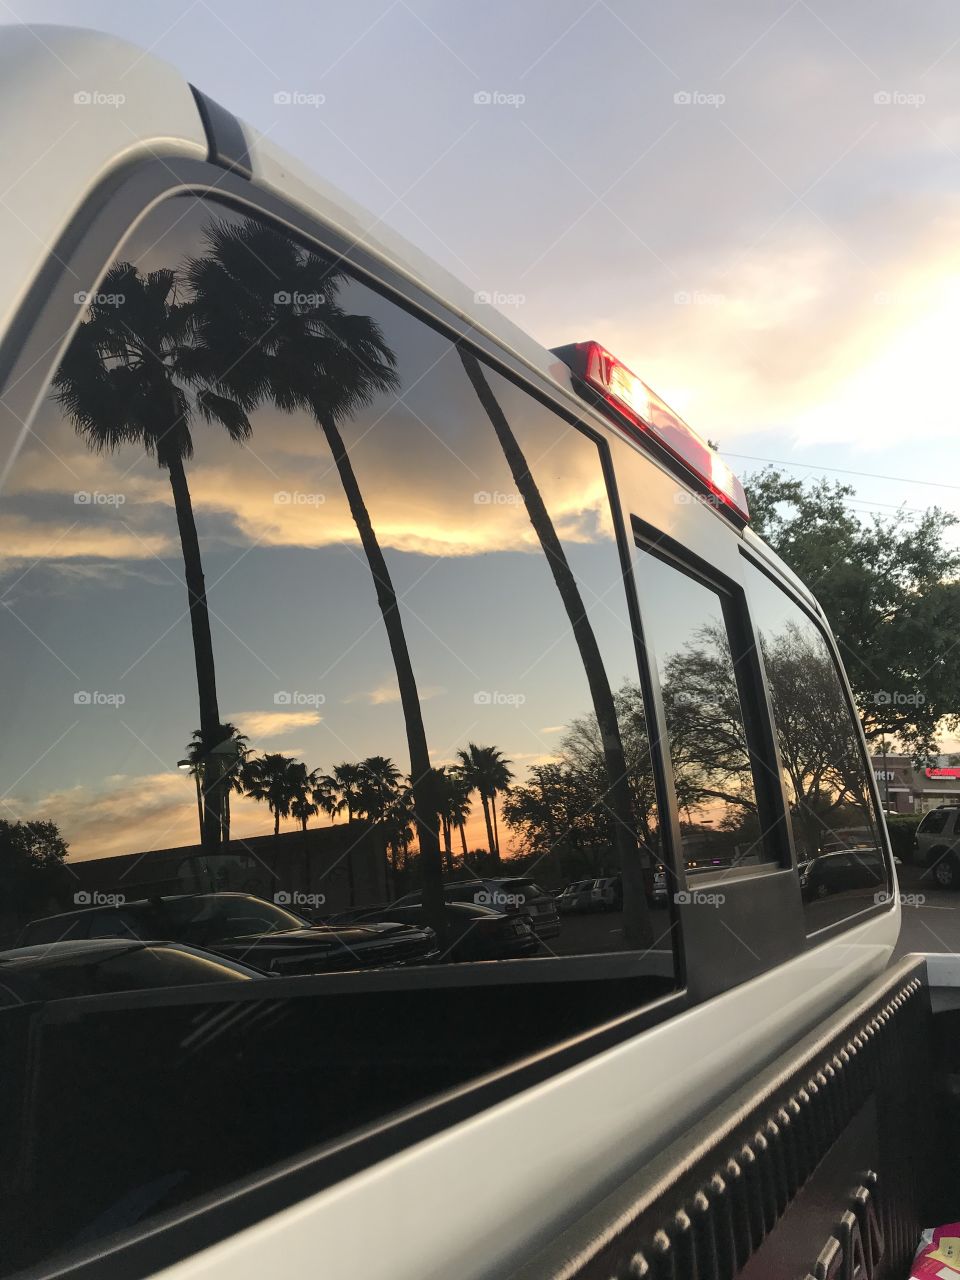 Reflection of sunset and palm trees in a car window